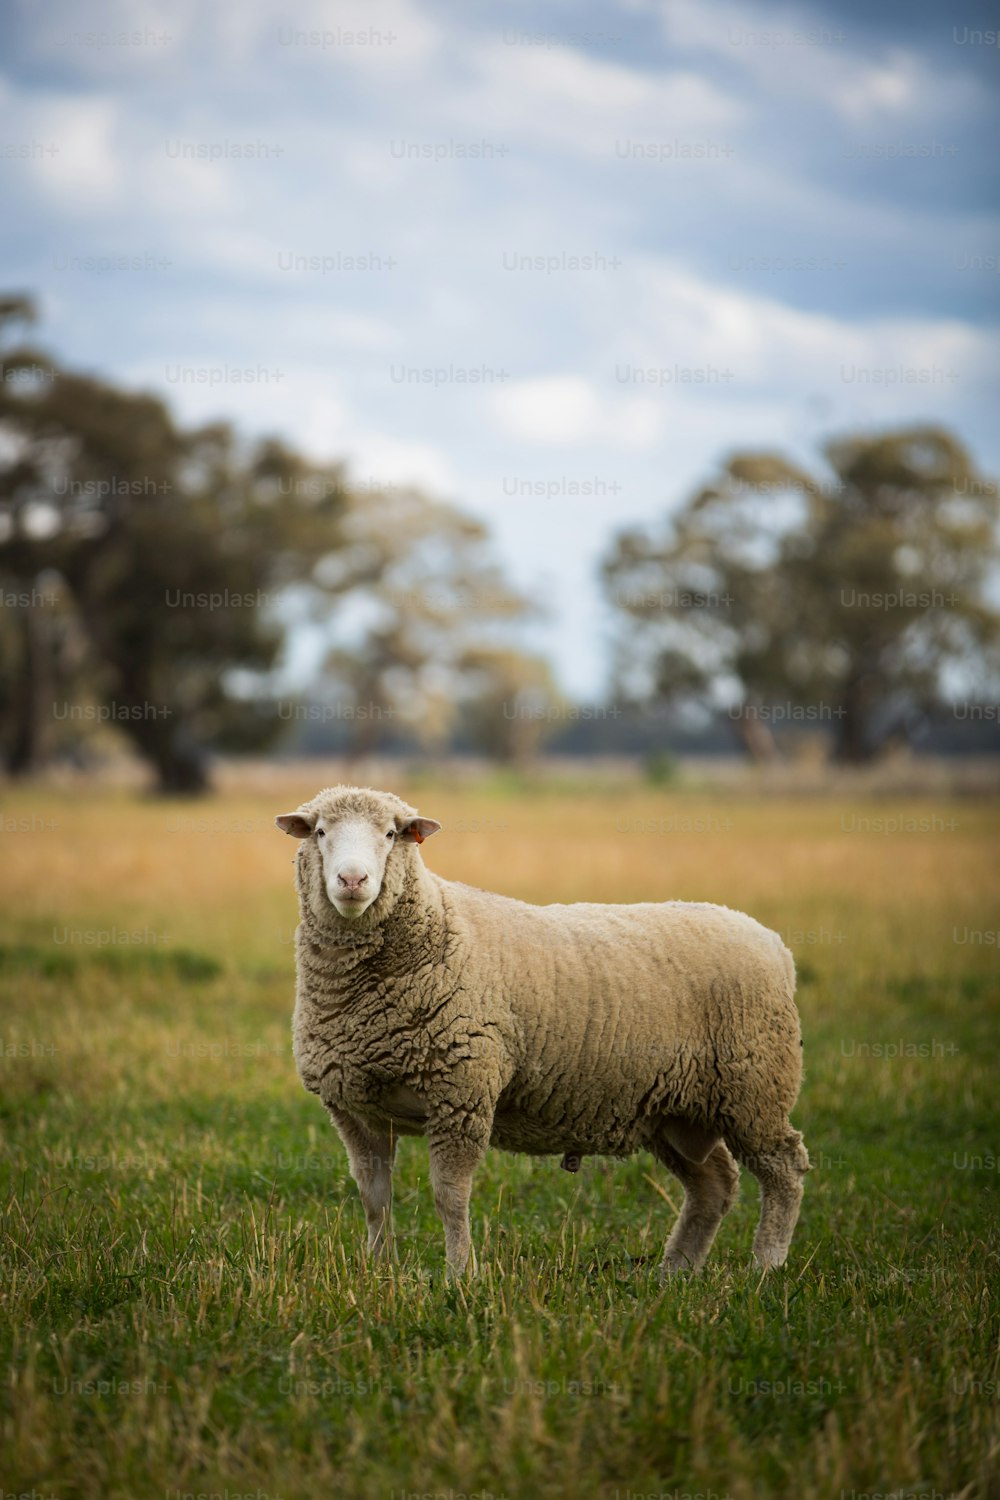 a sheep standing in a grassy field with trees in the background